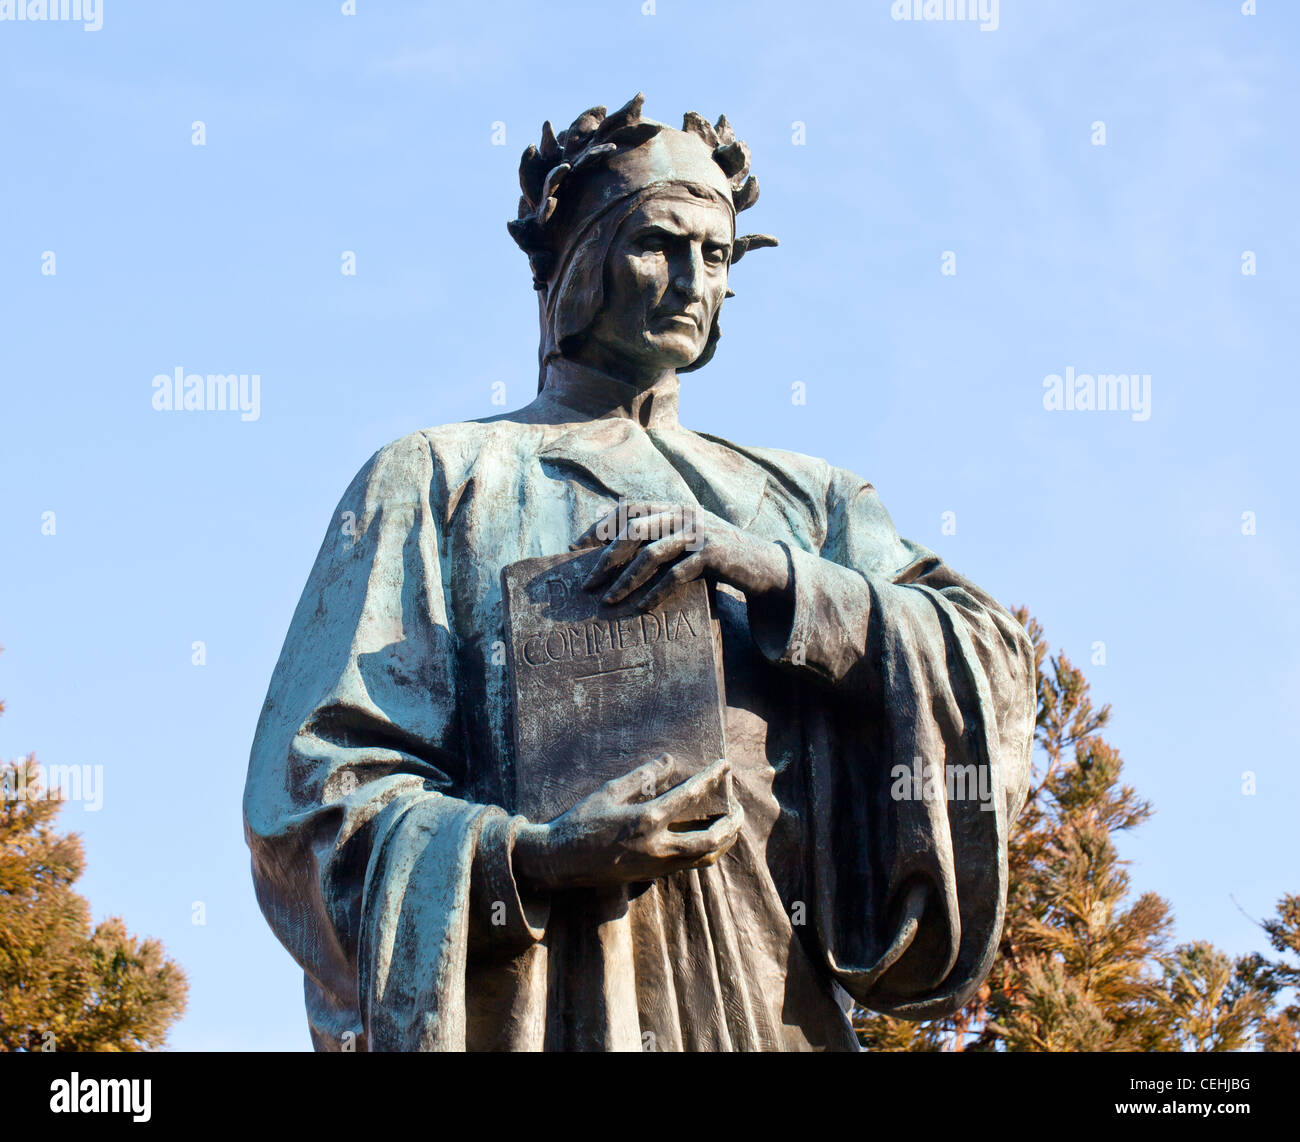 Statue of Dante holding Commedia book in Meridian Hill Park in Washington DC Stock Photo